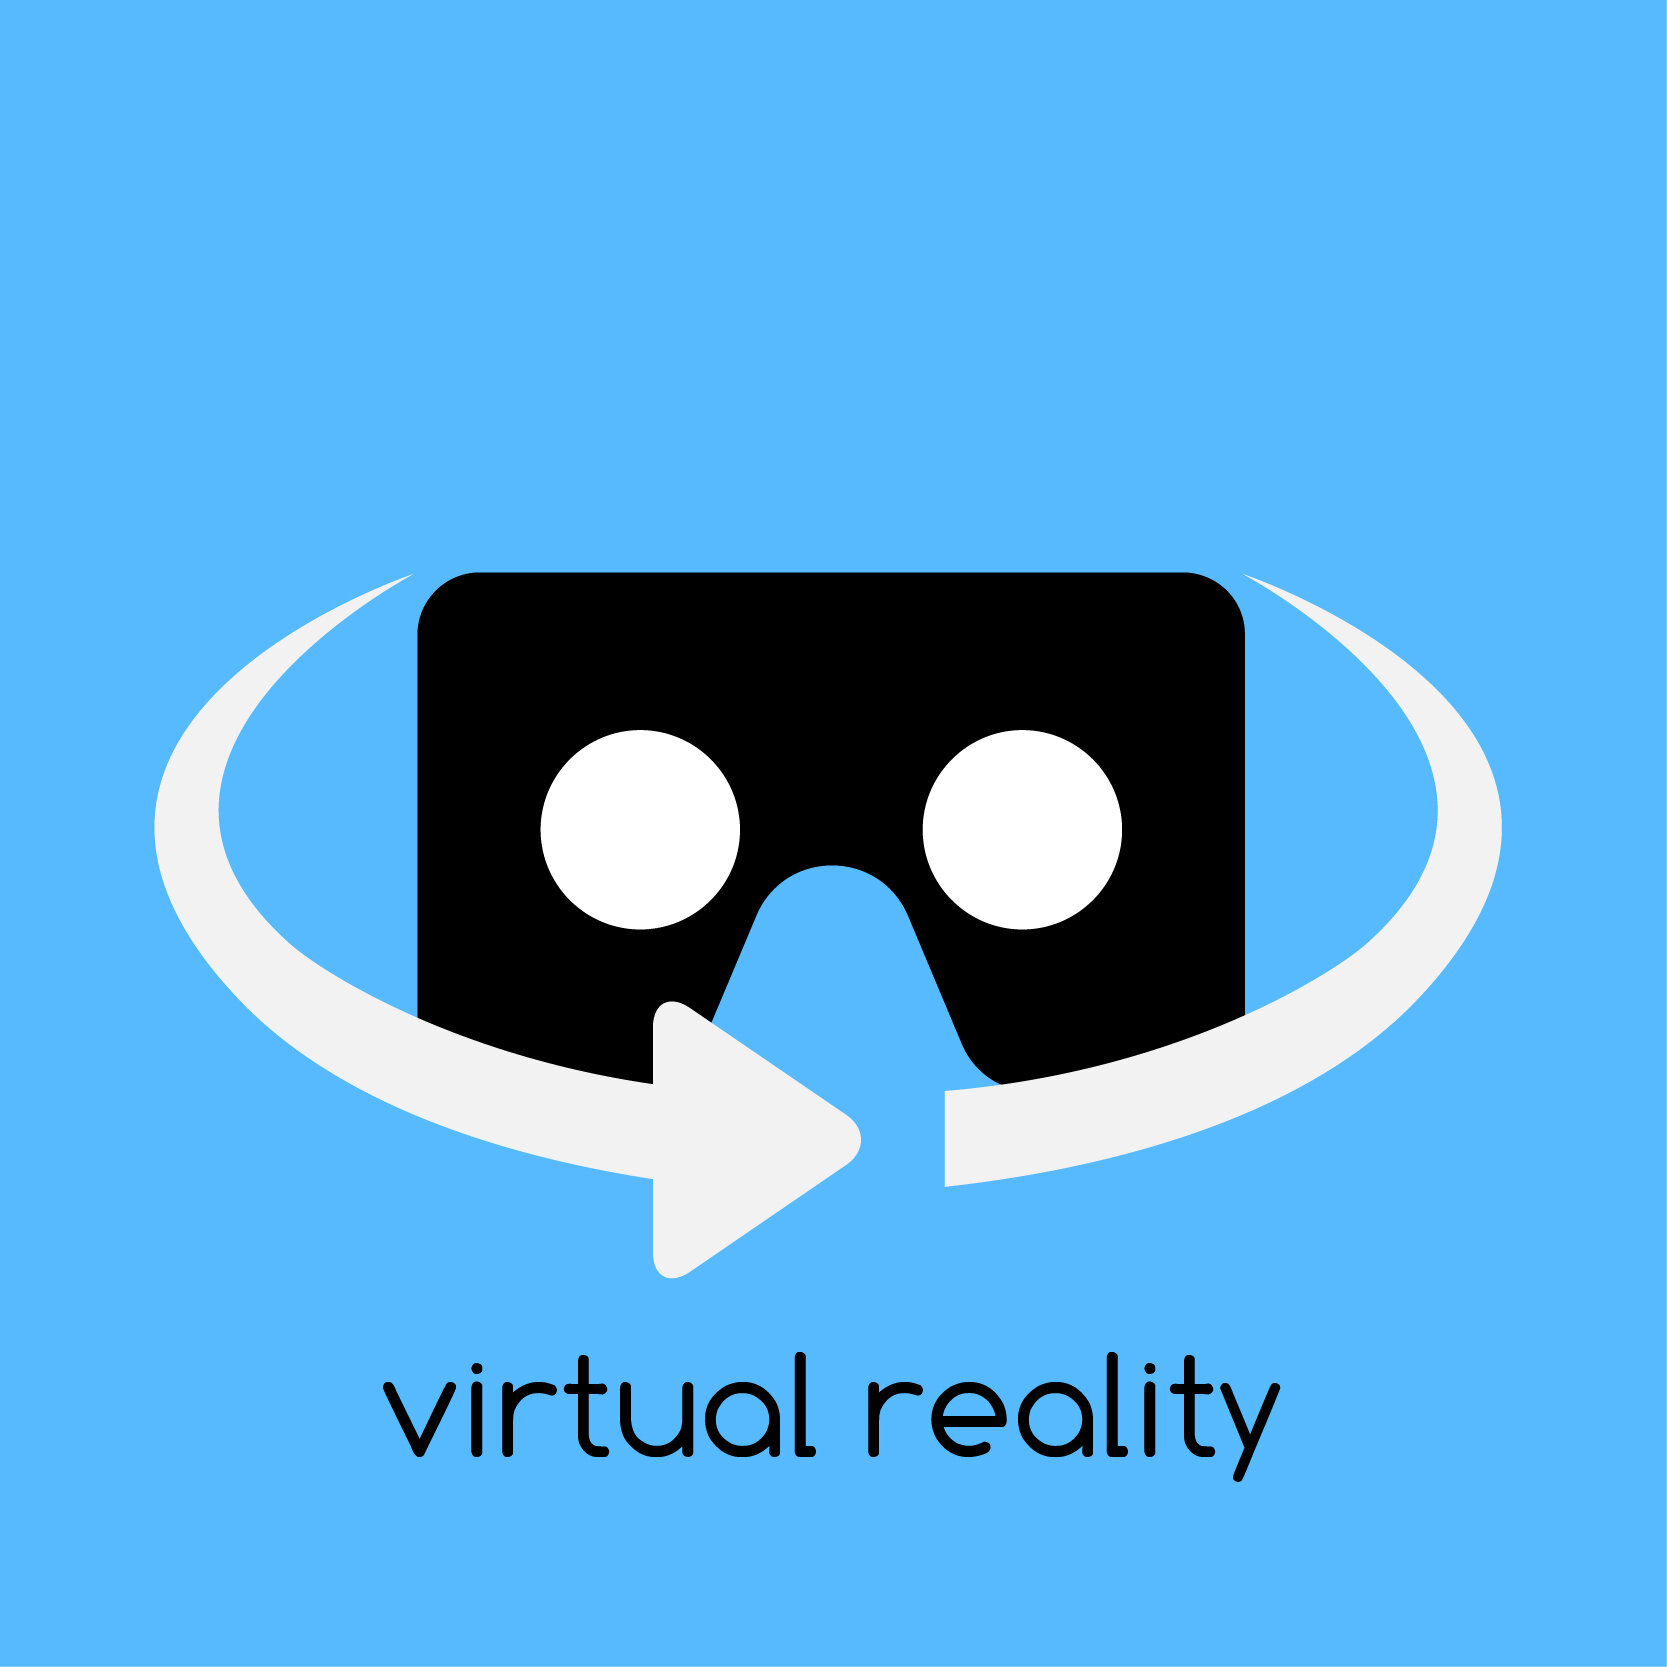 specialized service: virtual reality